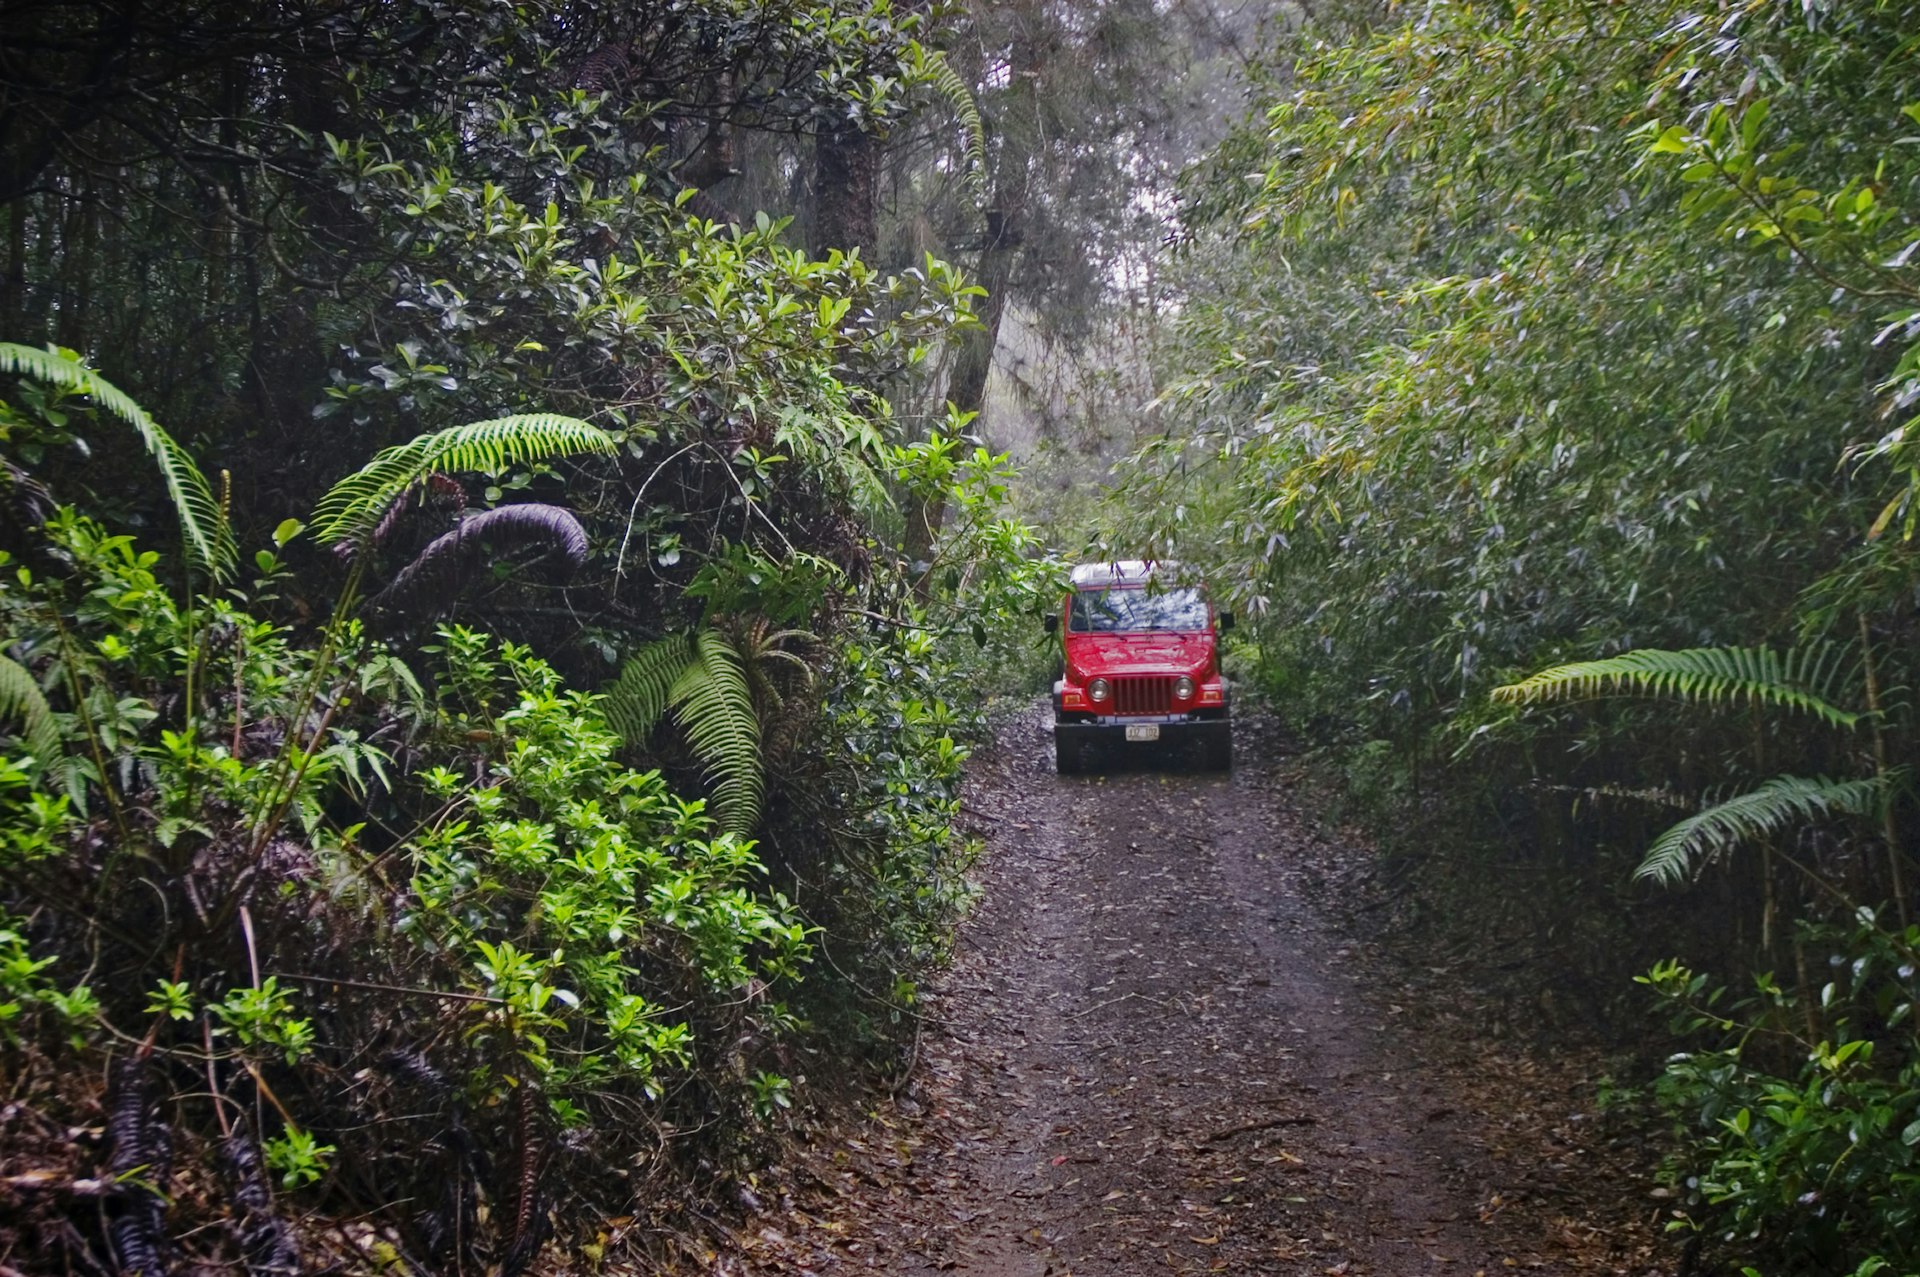 A drive down the Munro Trail in a 4WD vehicle is one of Lana‘i's most exhilarating experiences. Image by Greg Vaughn / Perspectives / Getty